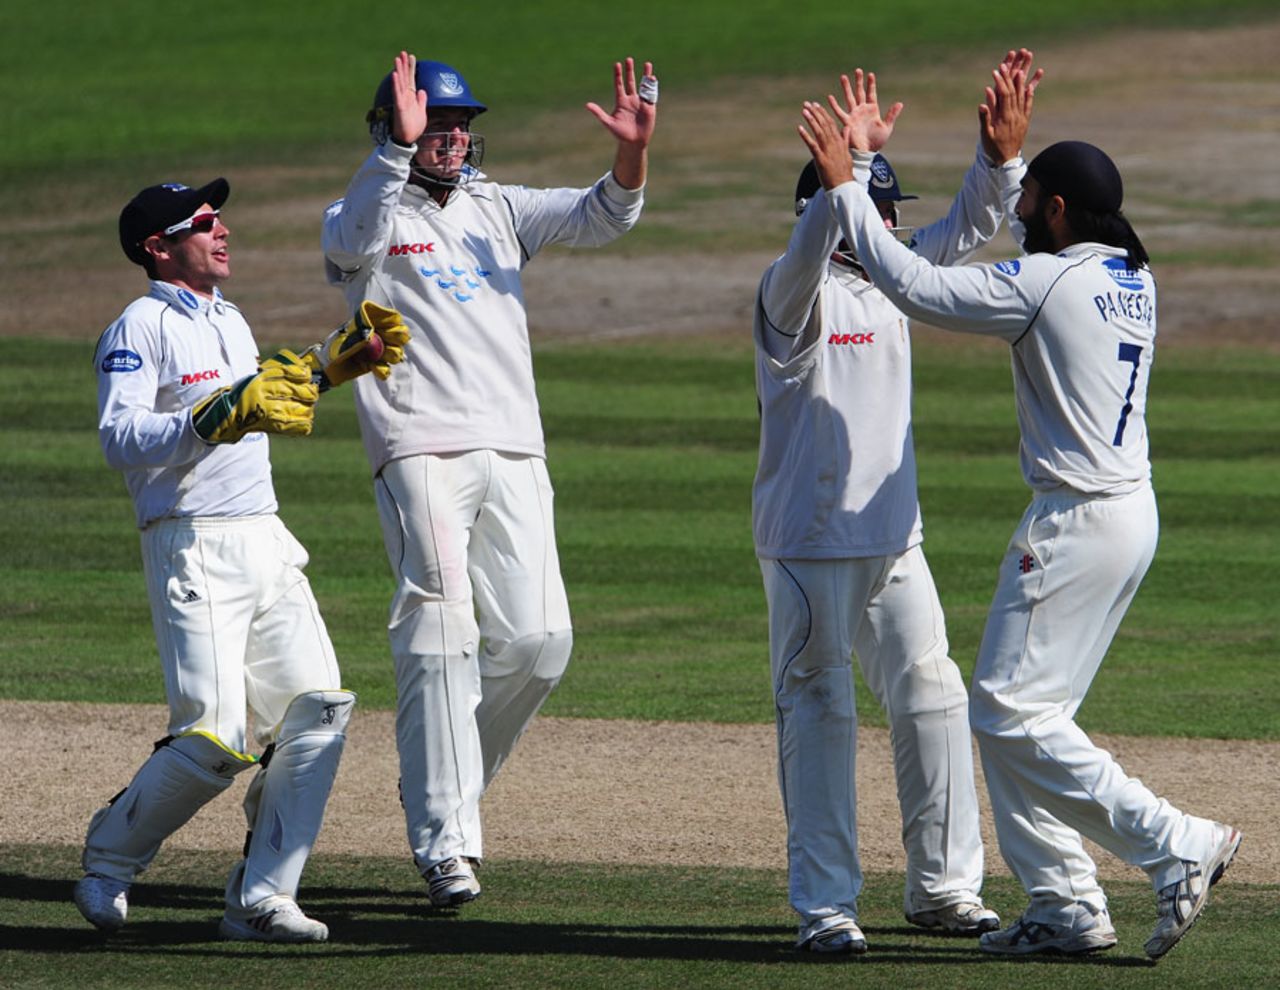 Monty Panesar celebrates his dismissal of Mal Loye, Sussex v Northamptonshire, County Championship Division Two, Hove, September 9 2010